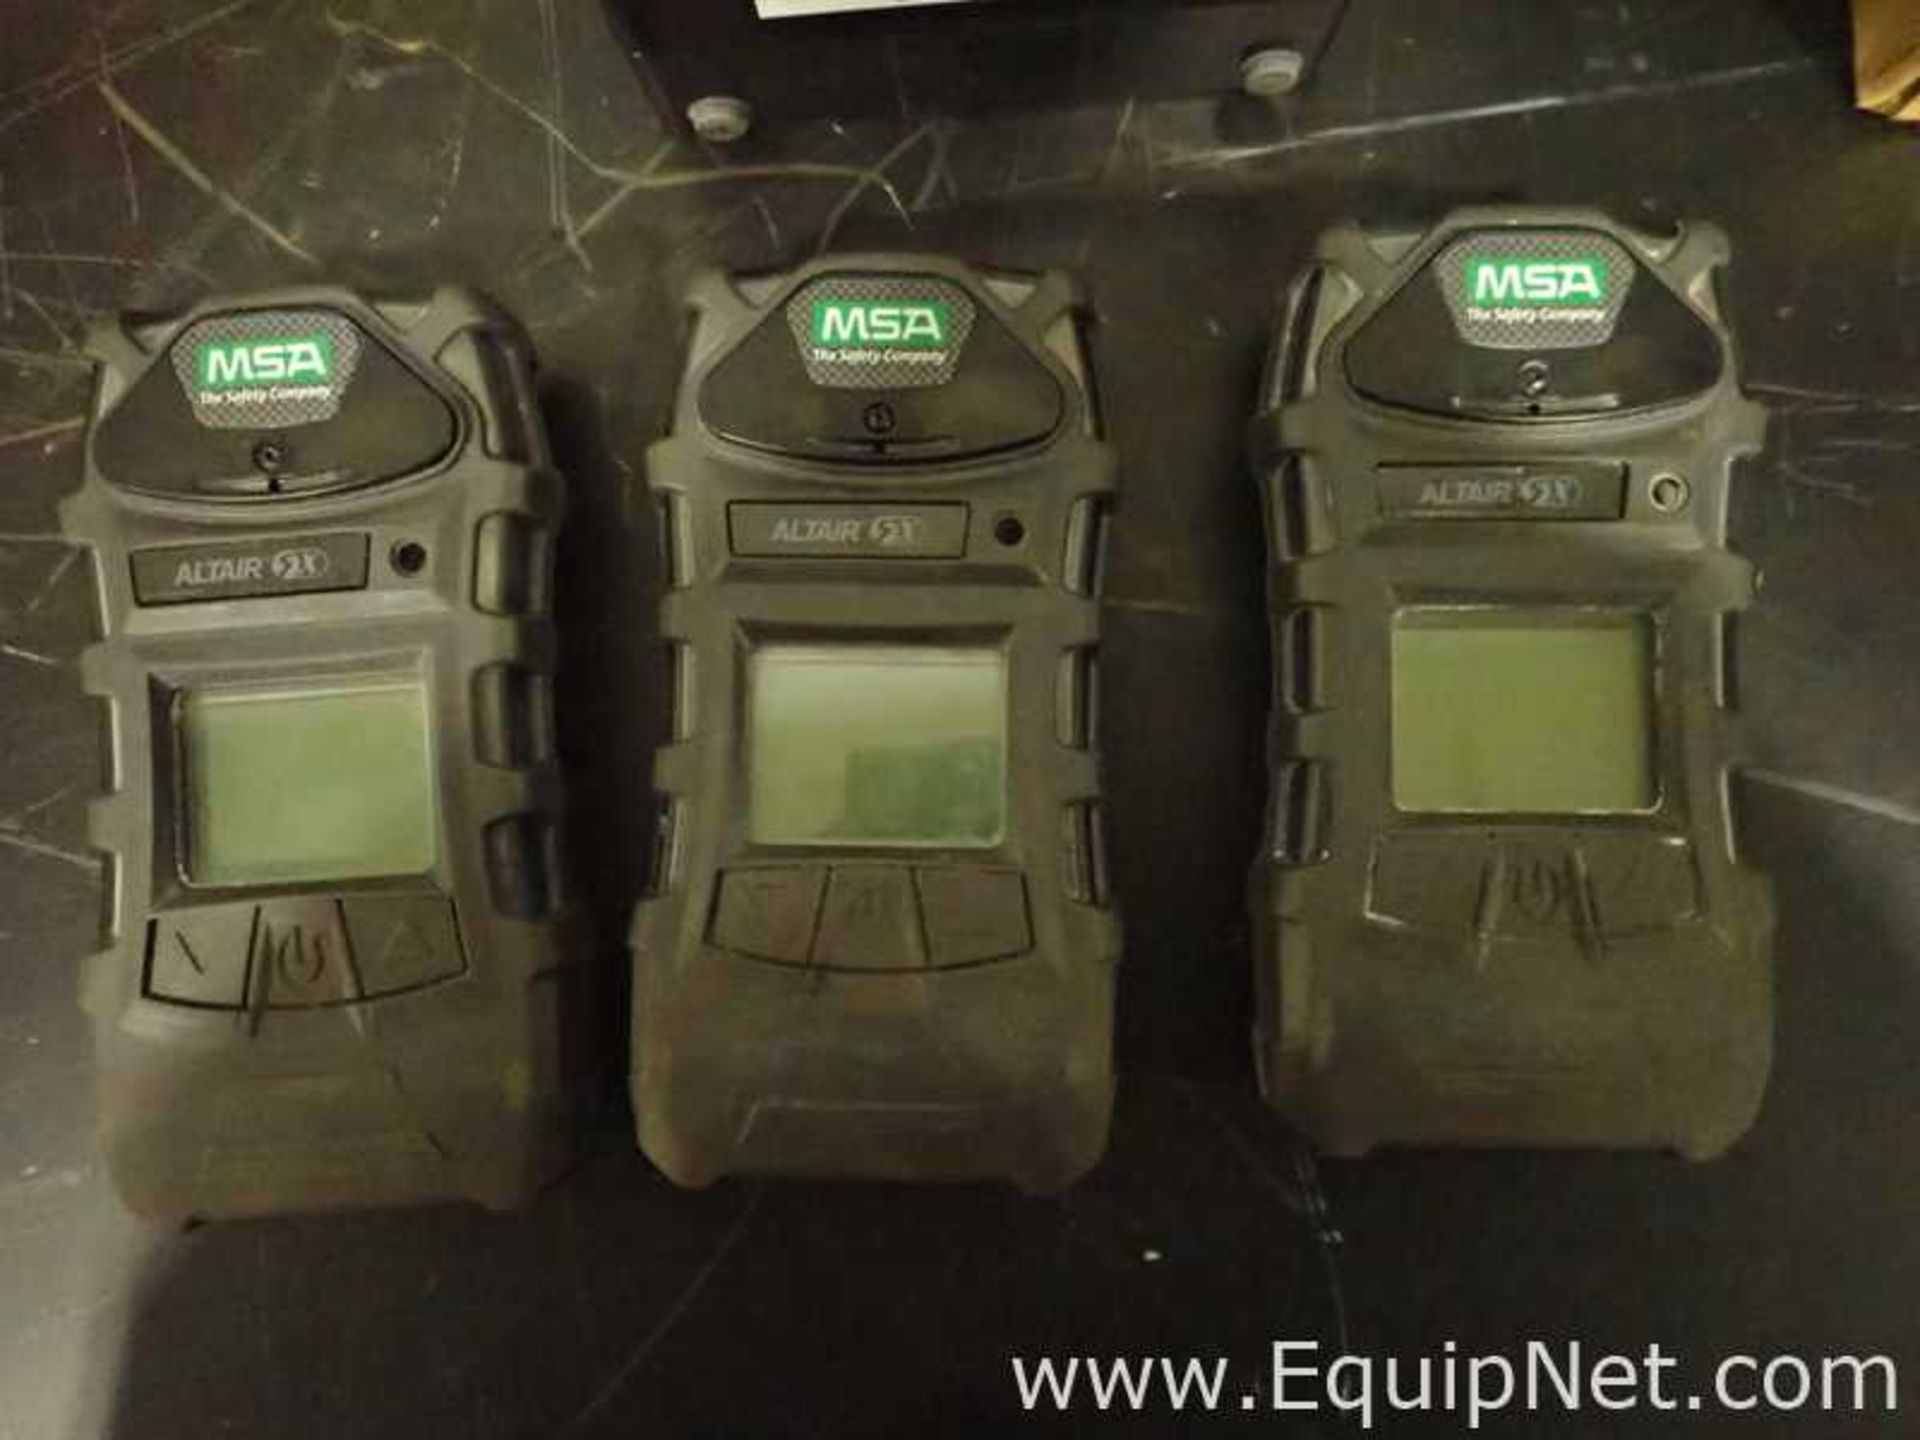 Lot of 5 MSA Safety Altair Gas Detectors - Image 4 of 14